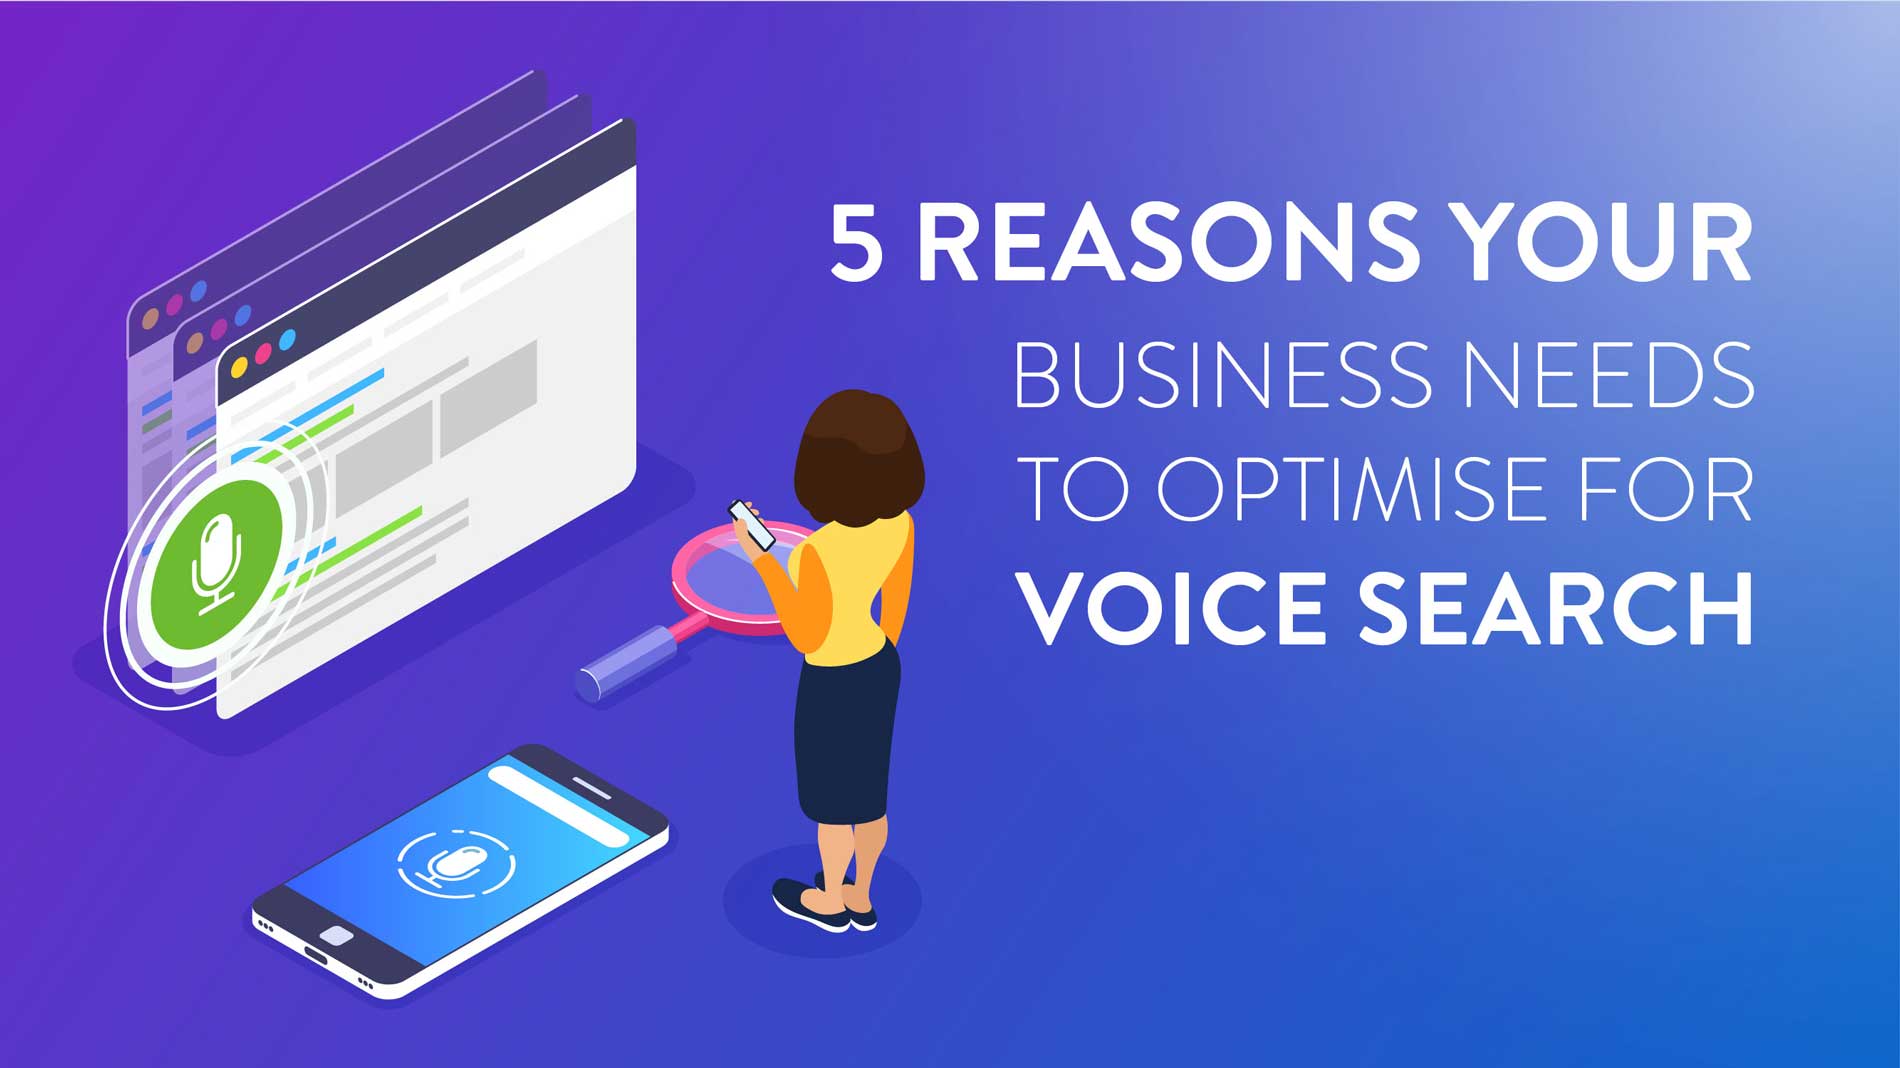 5 reasons your busimess needs to optimise for voice search